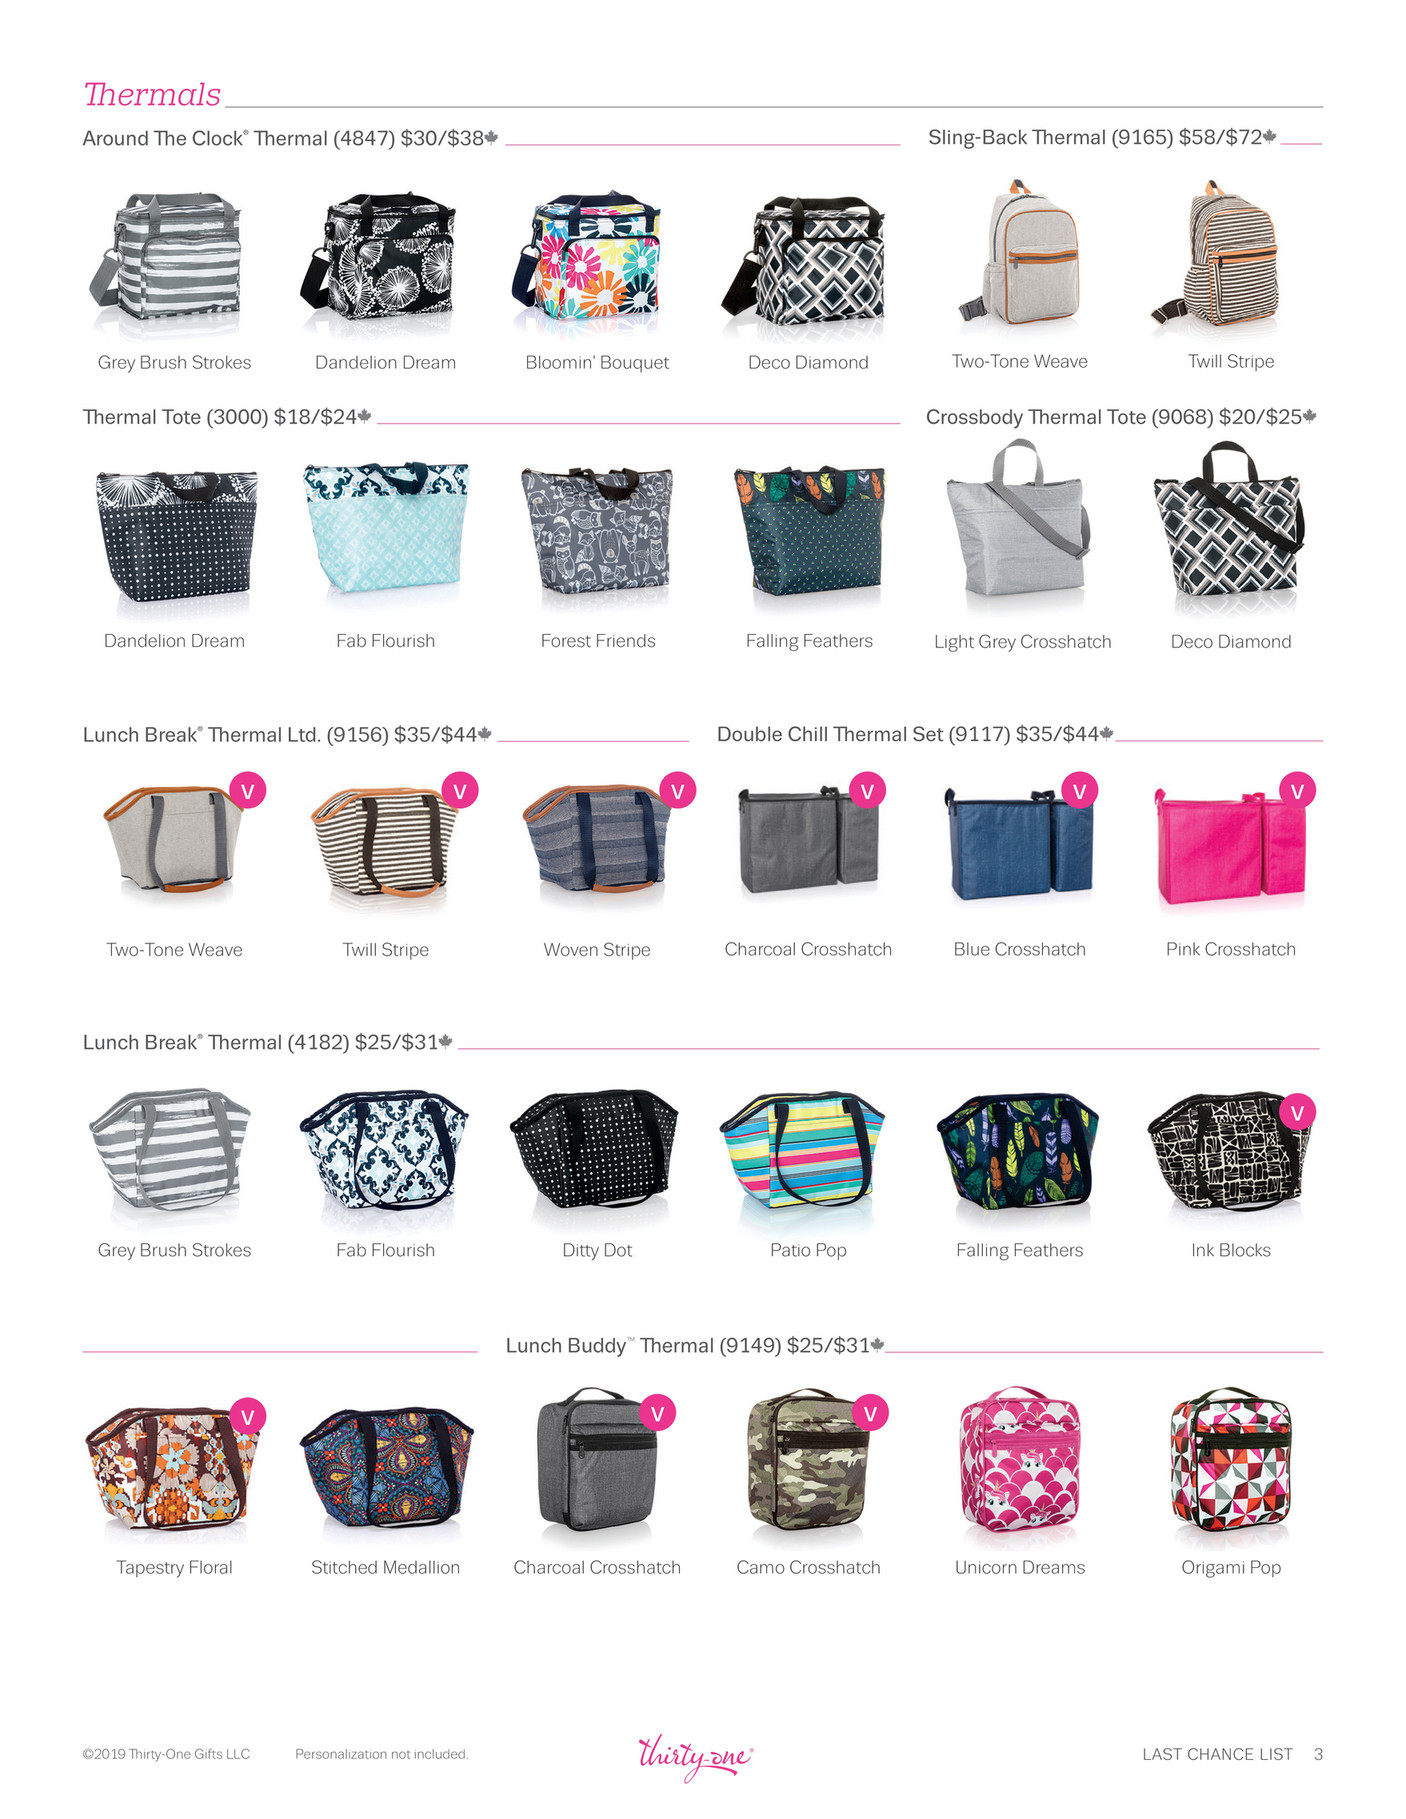 Thirty-One Gifts - RETIREMENT LIST - Page 1 - Created with Publitas.com